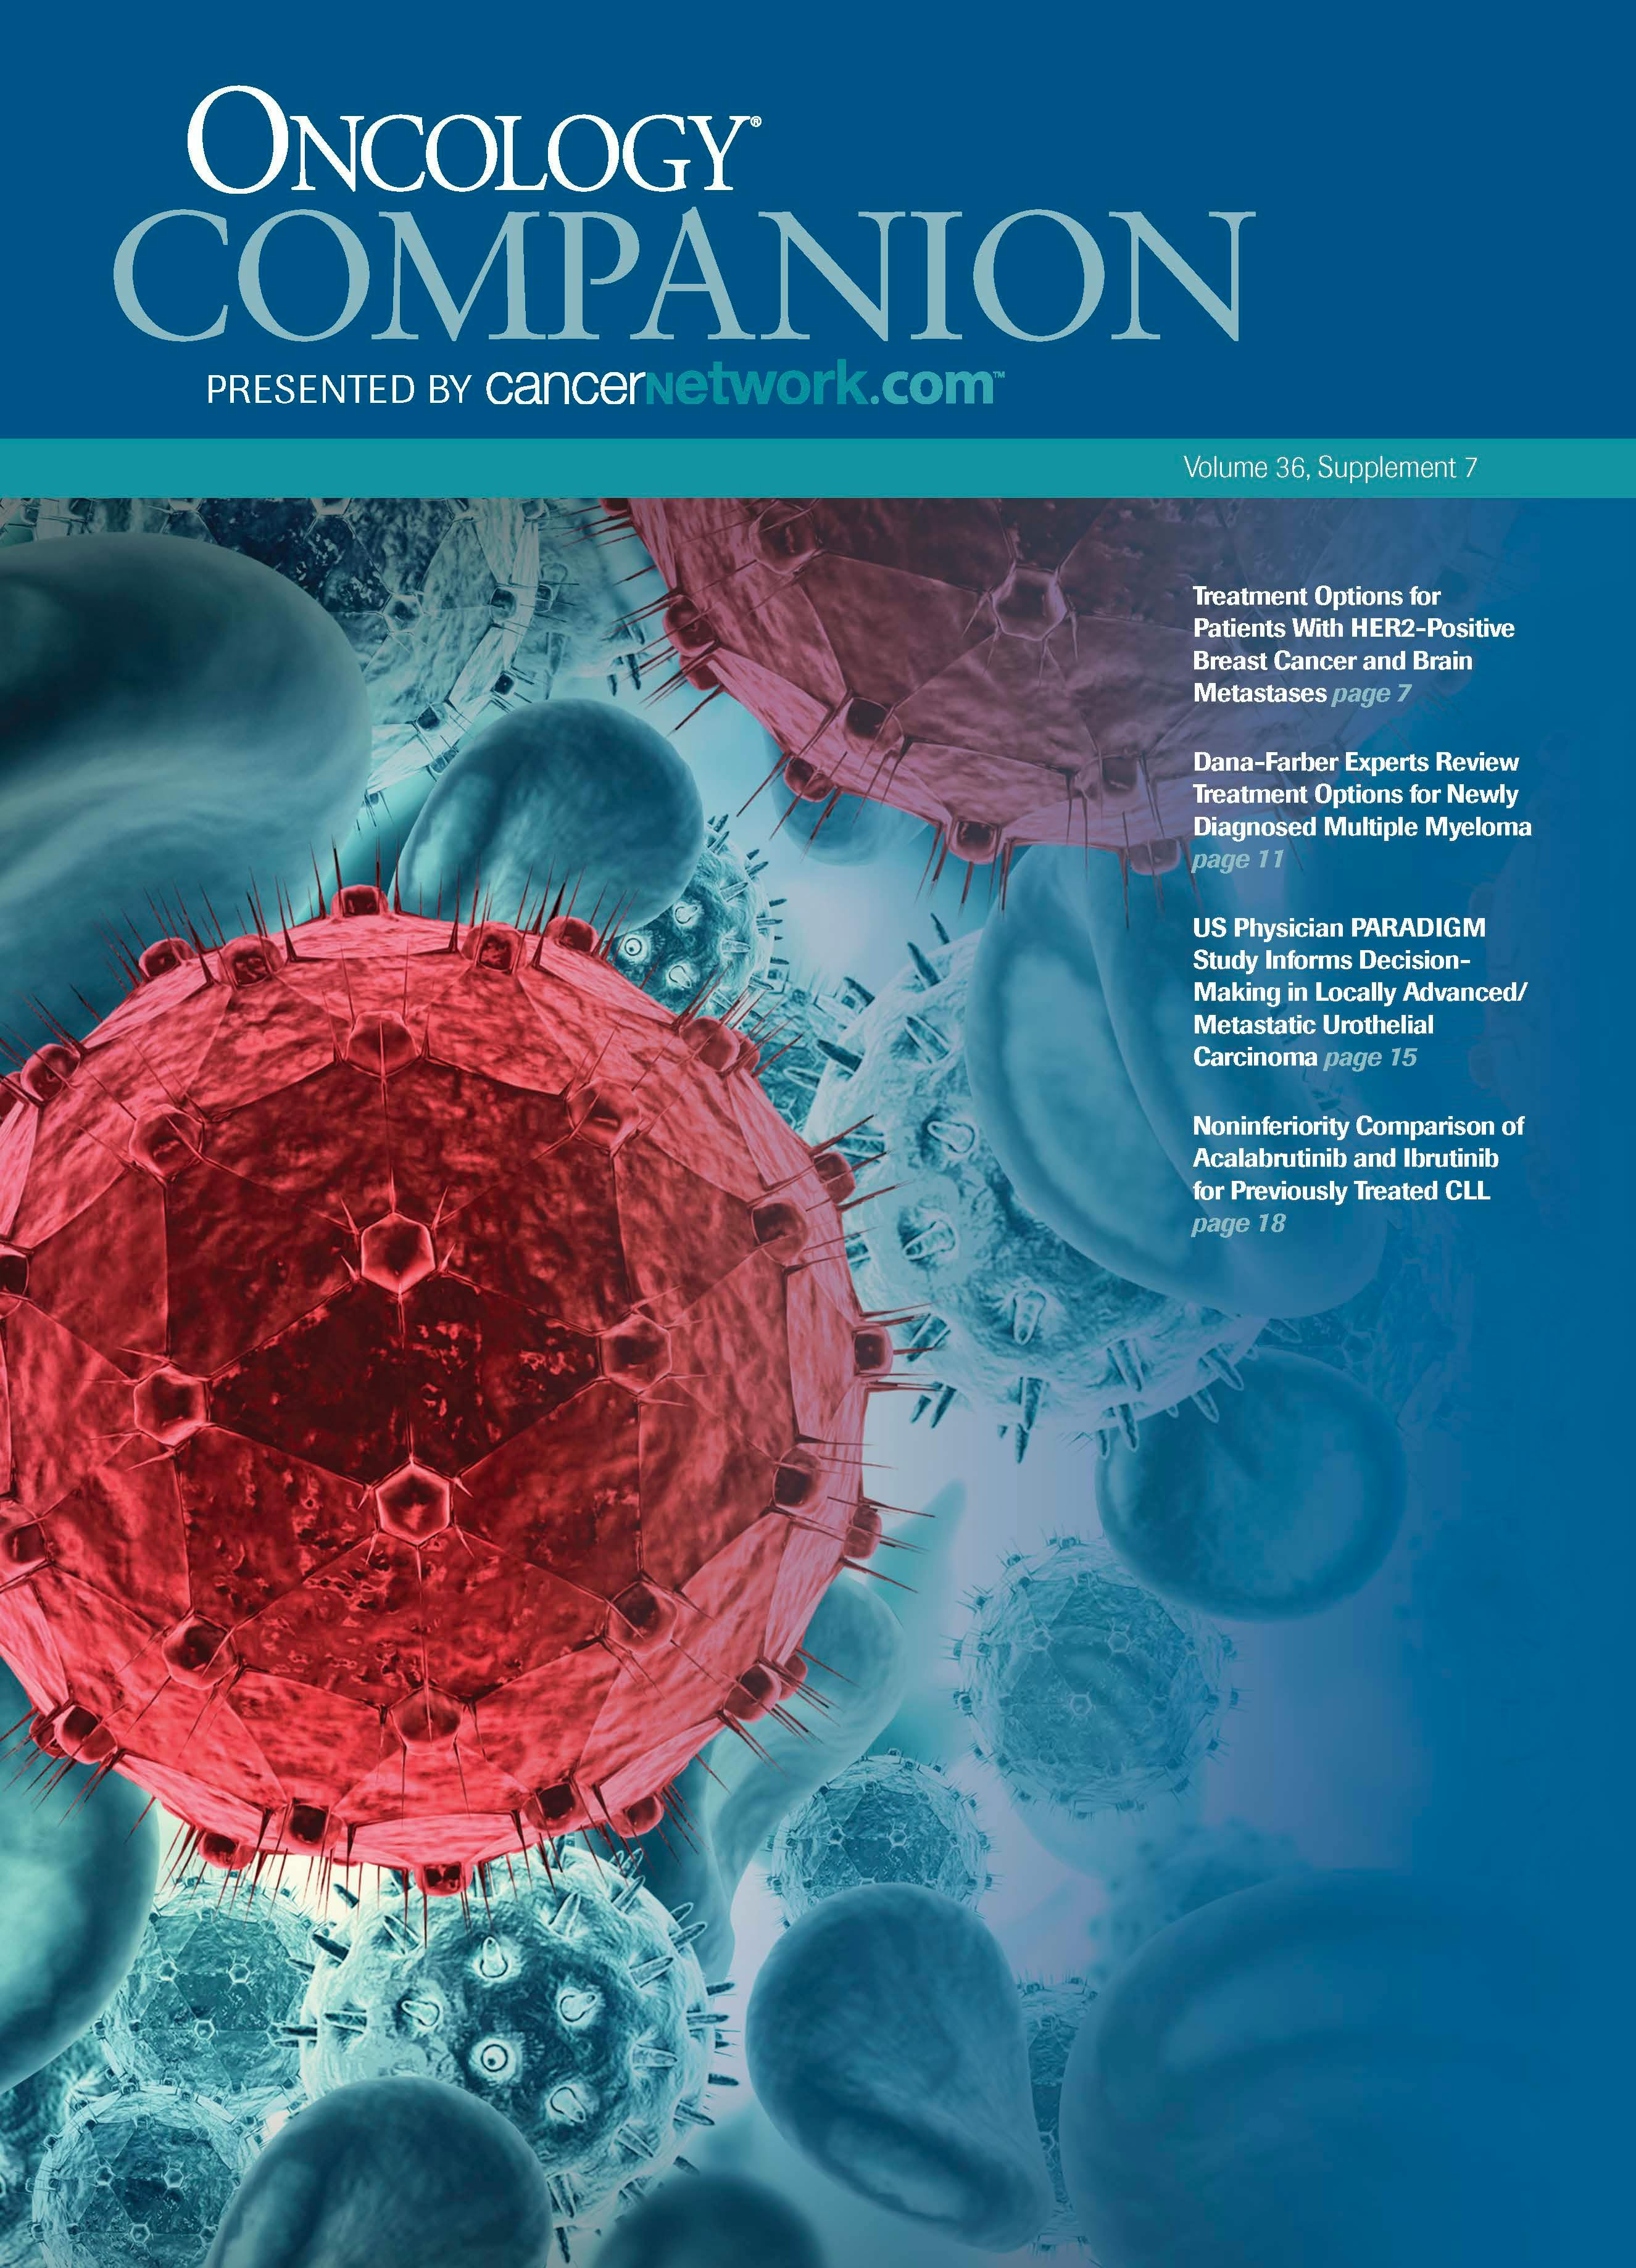 ONCOLOGY® Companion, Volume 36, Supplement 7